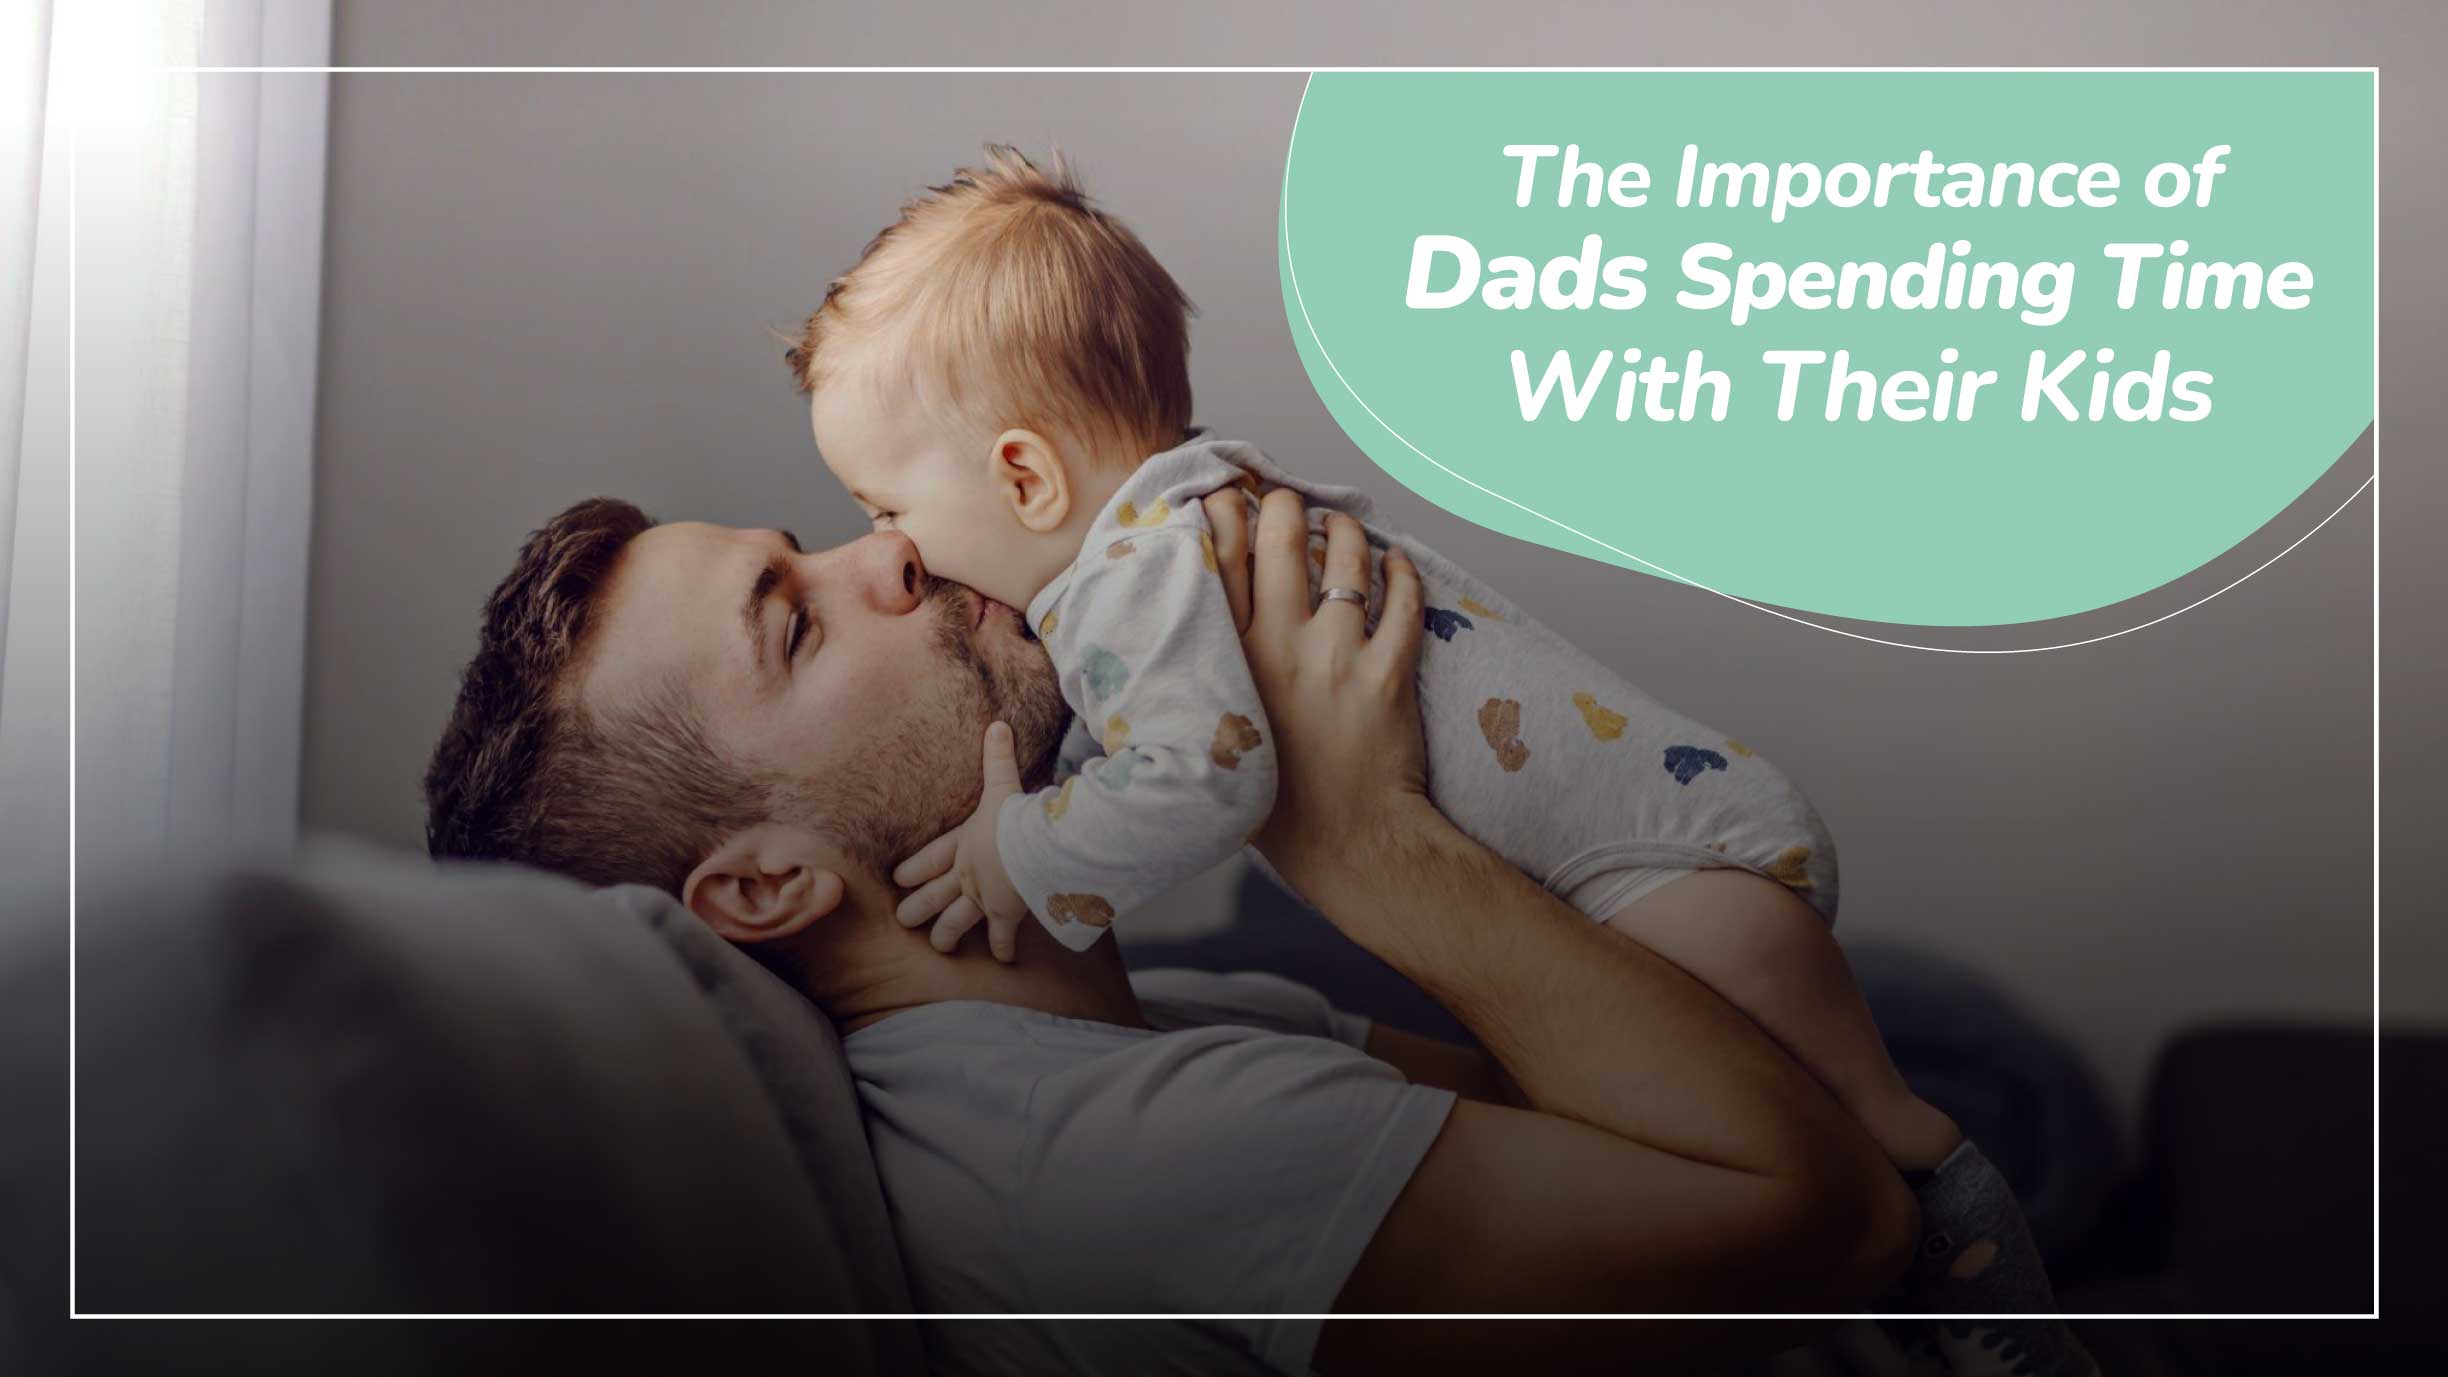 The Importance of Dads Spending Time With Their Kids